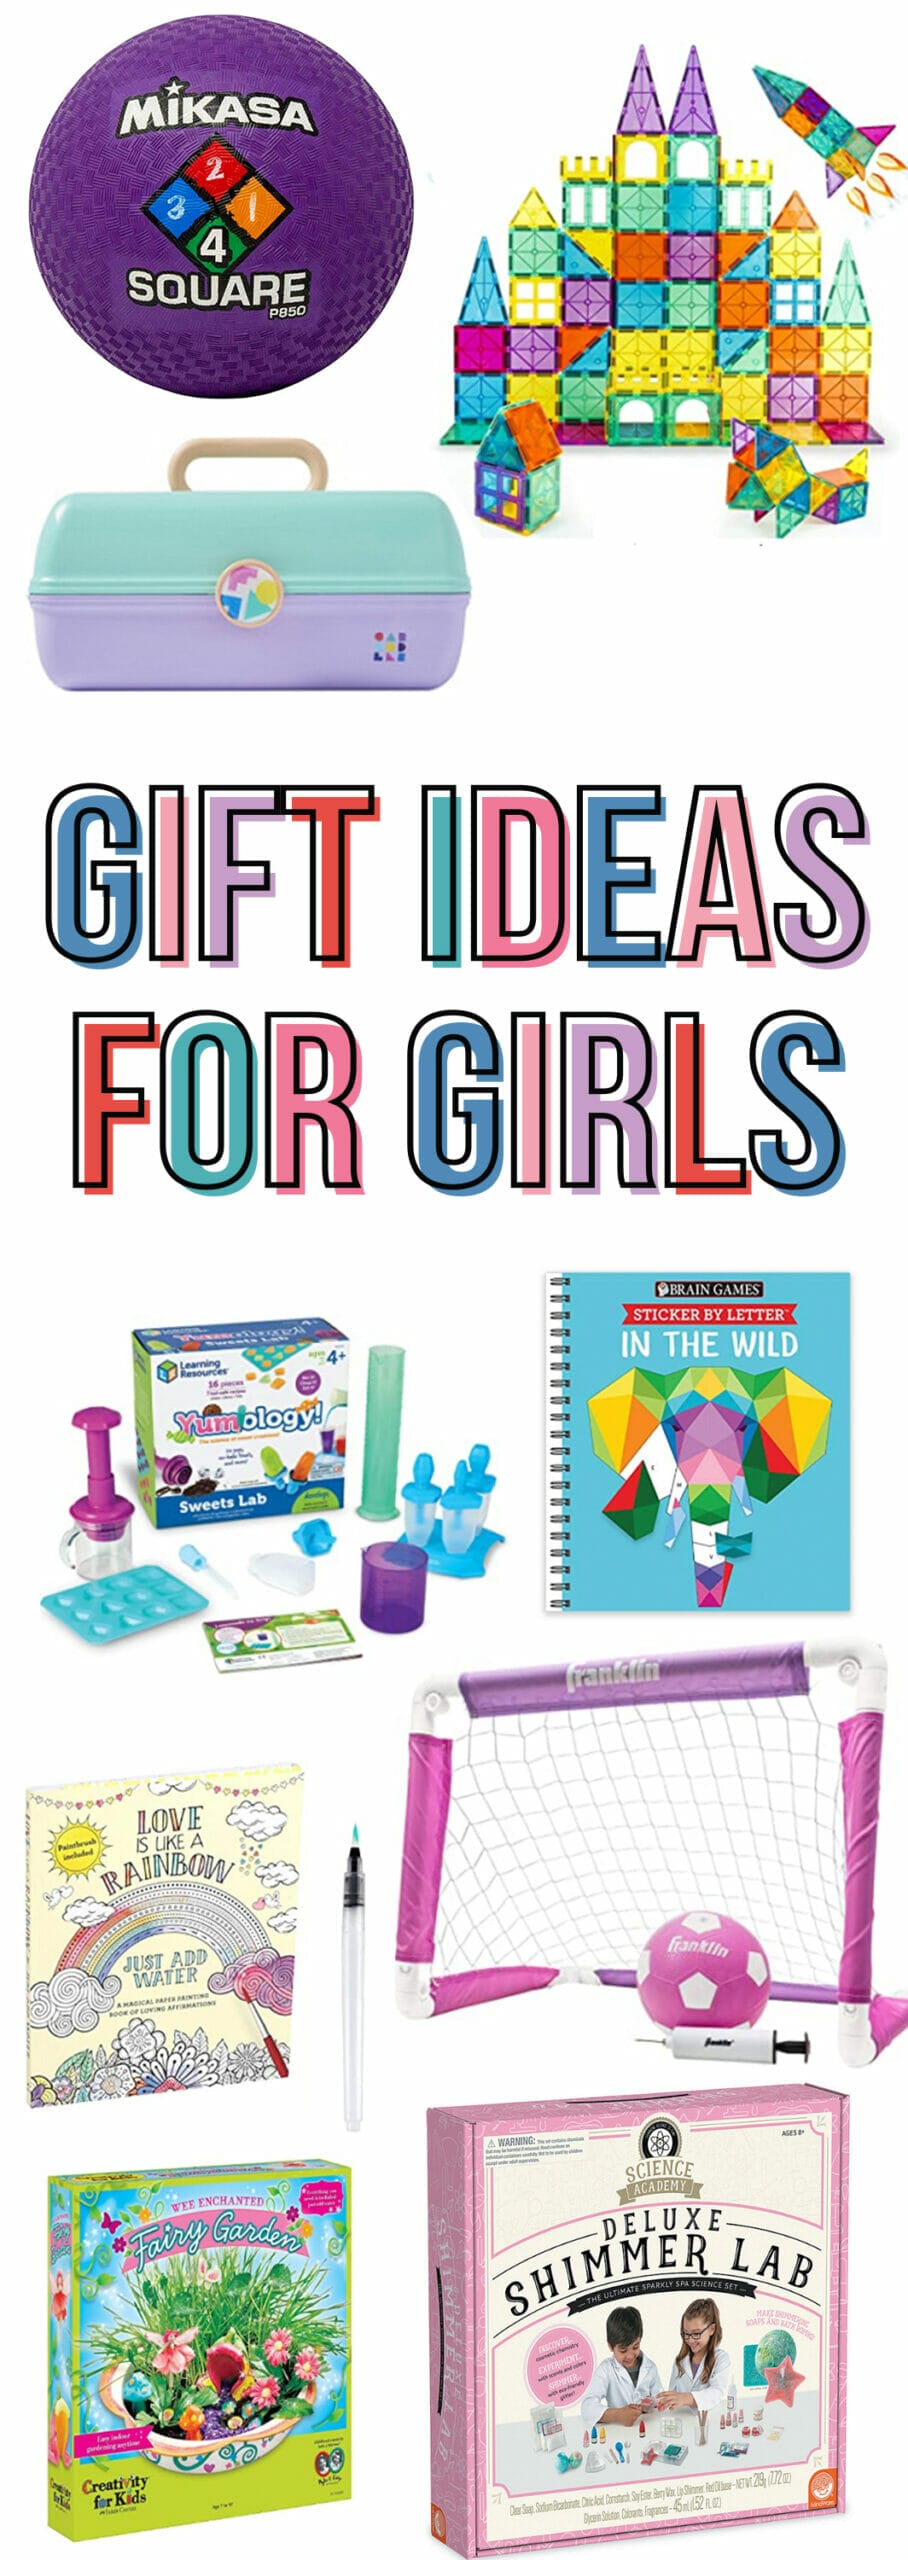 Gift Guide for Girls Age 7-12 - The Crafting Chicks